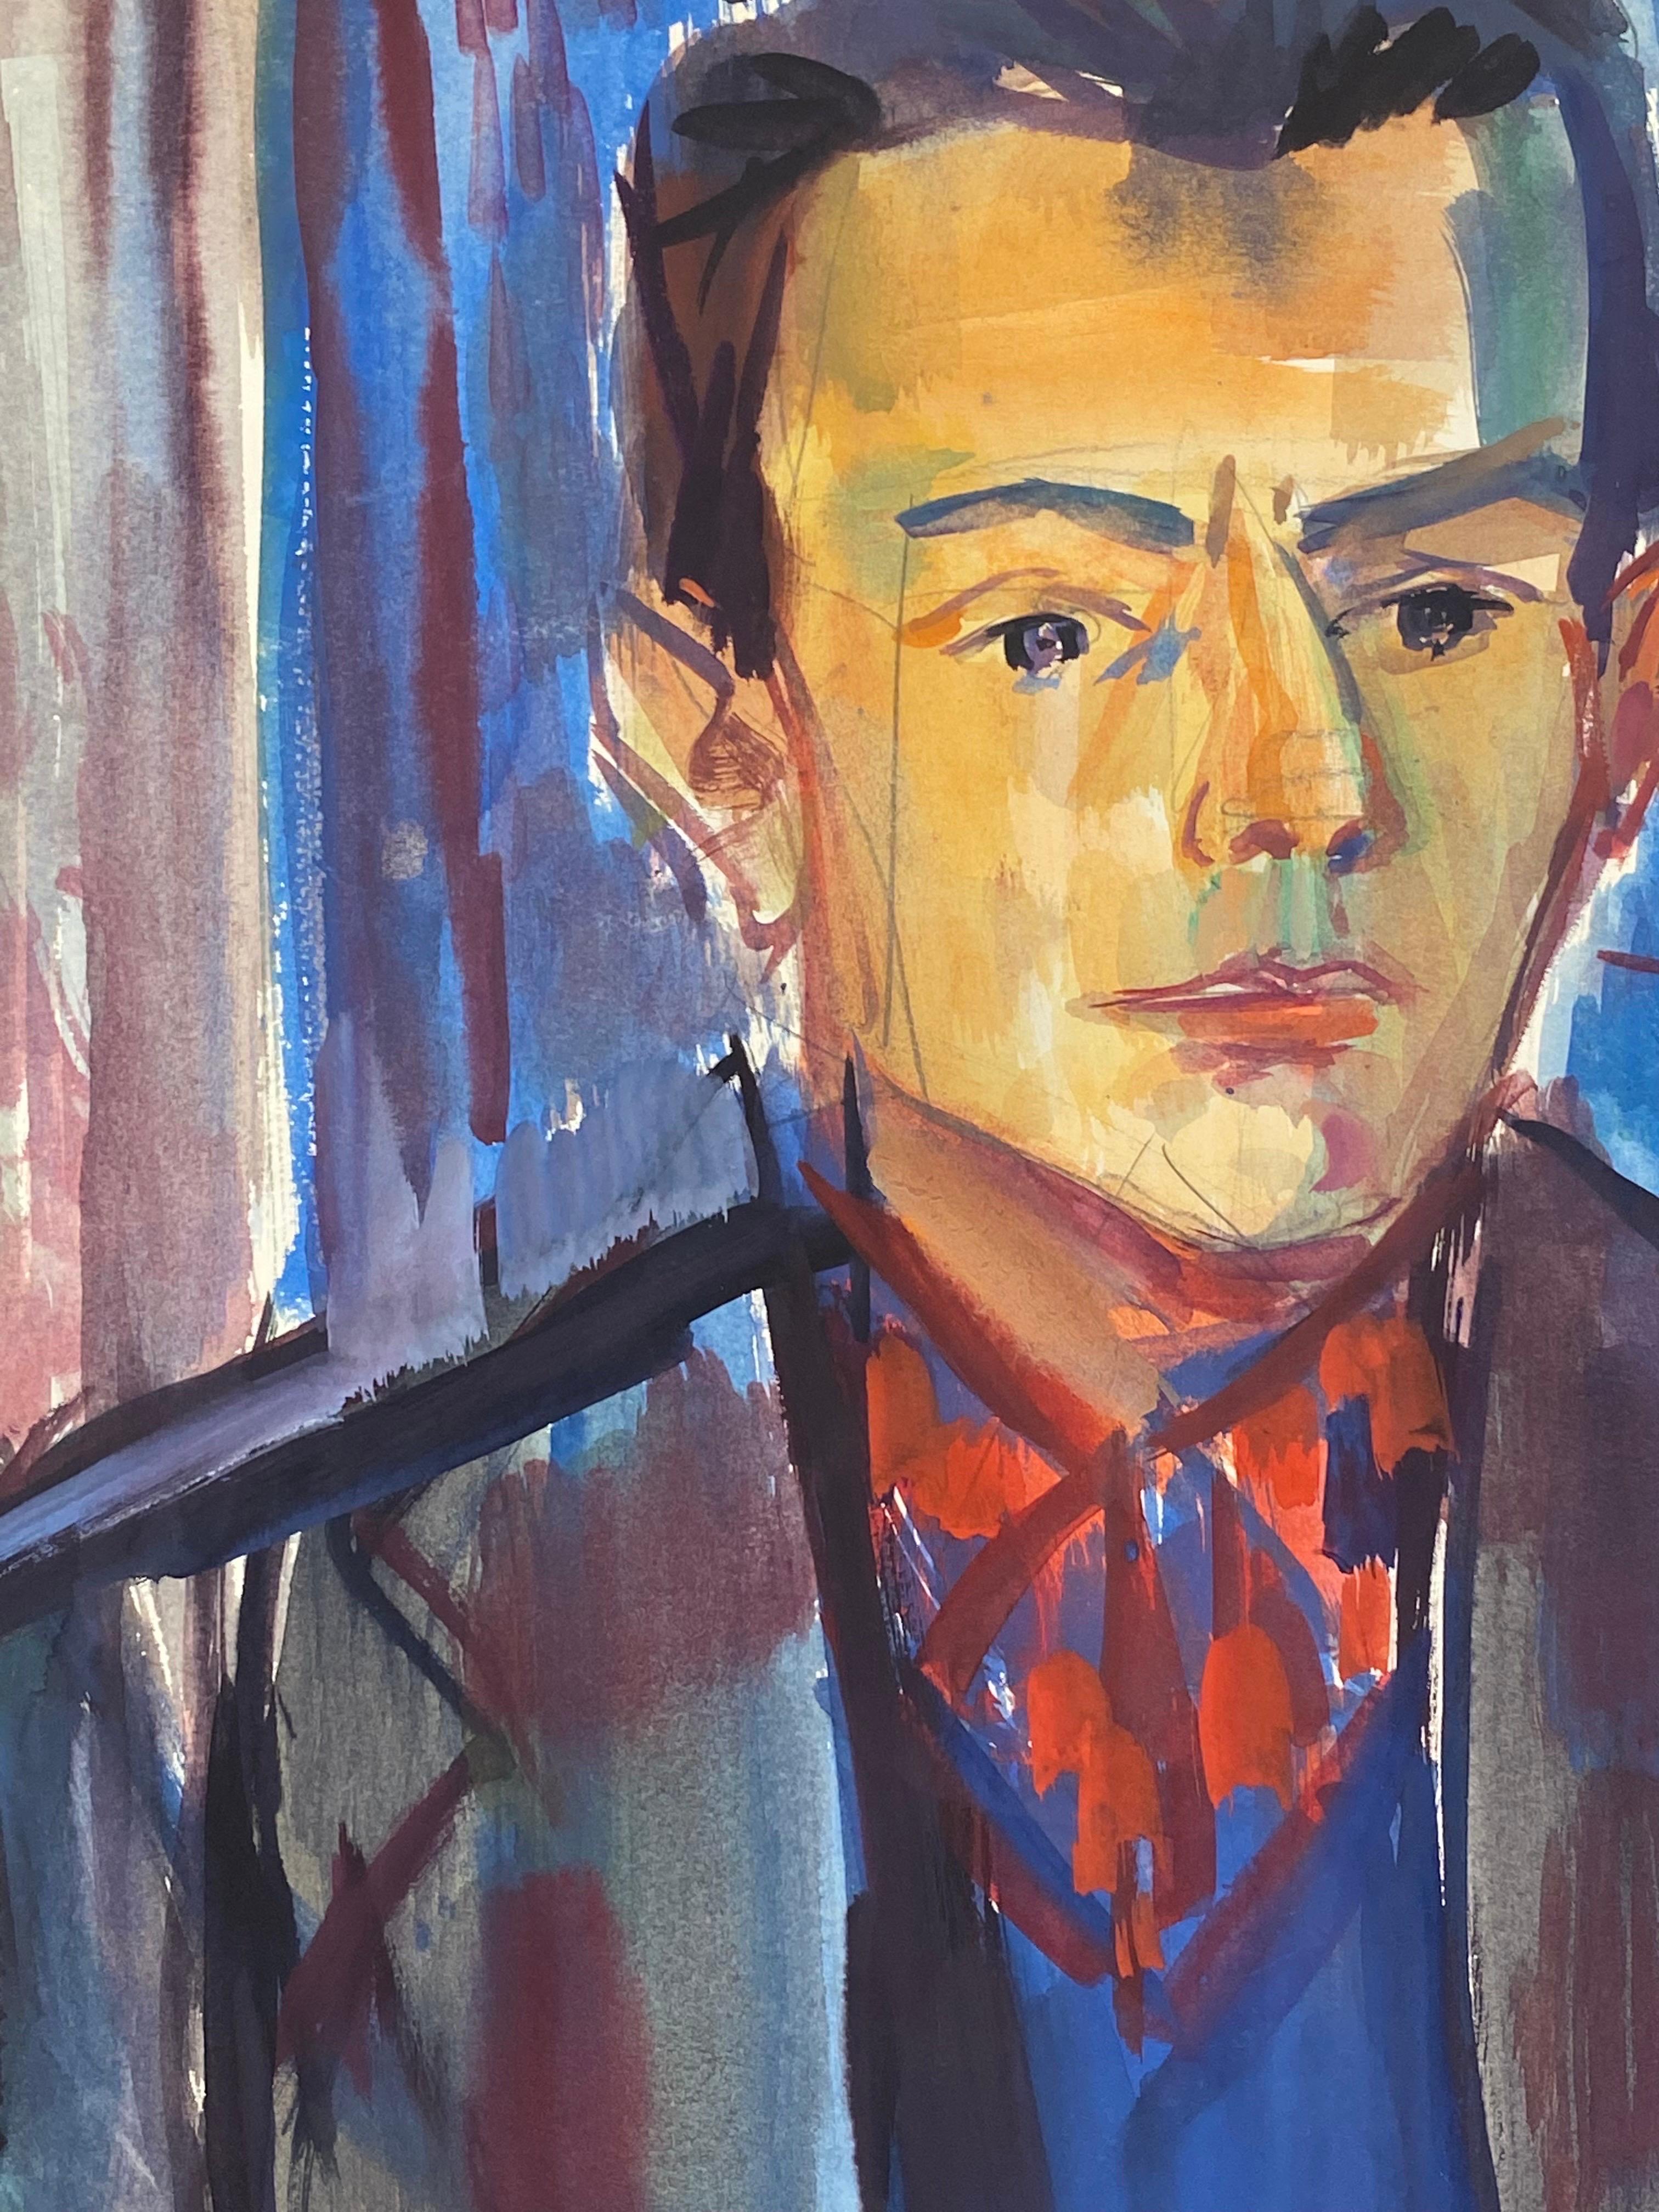 Original French Mid Century Watercolour - Portrait Of A Dapper Man Smoking - Painting by Édouard Righetti (1924-2001)